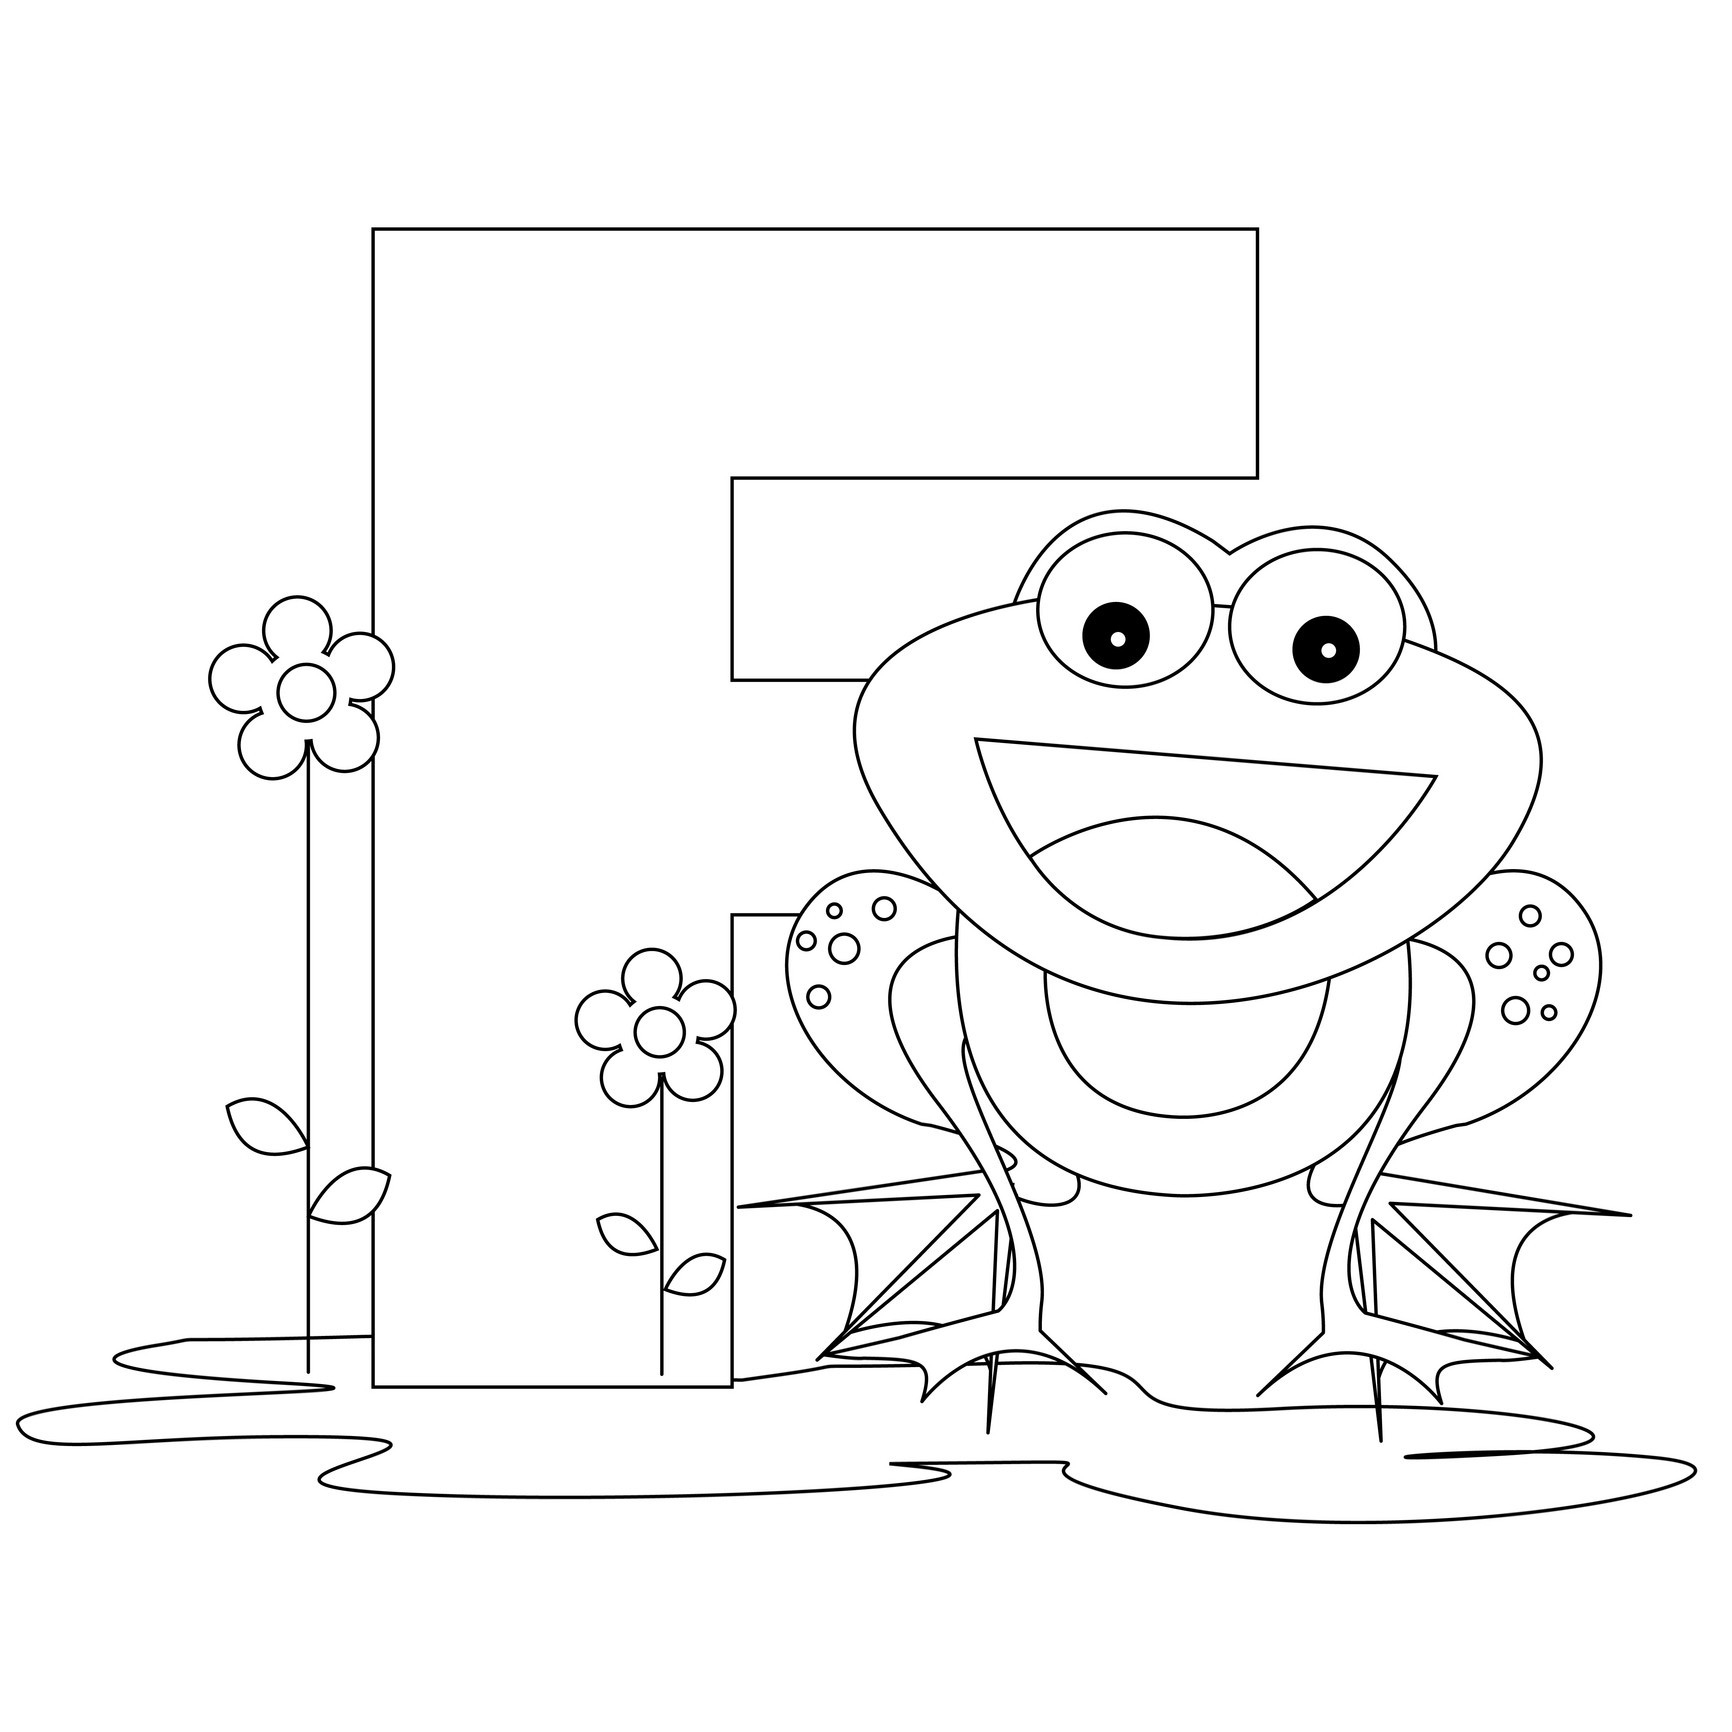  Abc Coloring Sheets For Kids 5